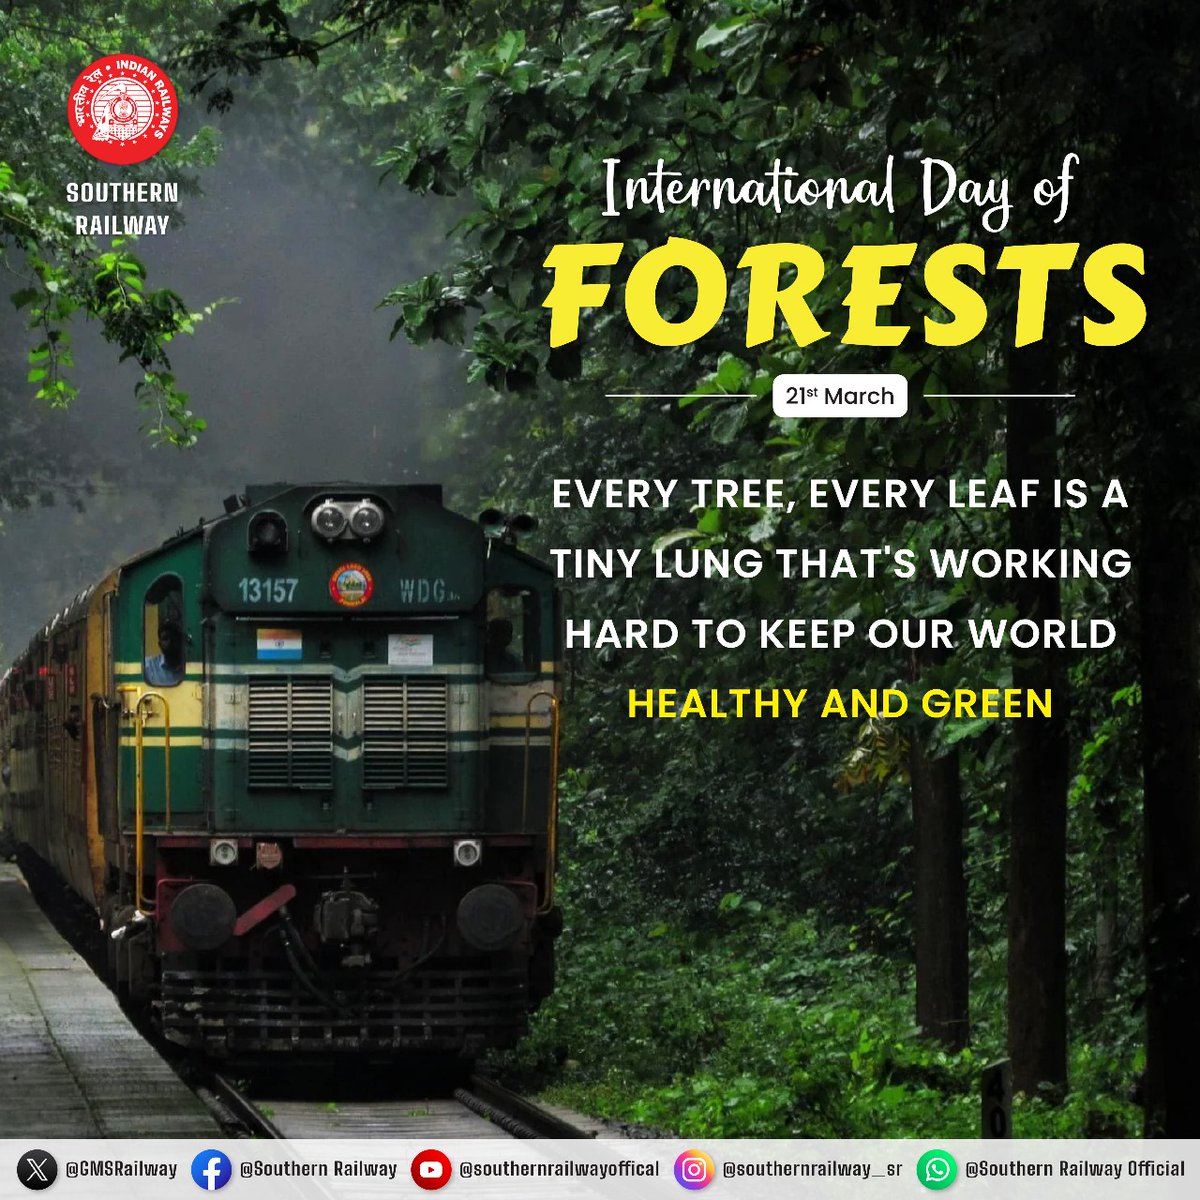 Did you know? 

Every tree acts like a tiny lung, cleaning our air. This #WorldForestDay, let's pledge to protect them!

#ForestsForTheFuture  #ProtectOurForests  #TreesForLife #SouthernRailway #ProtectNature